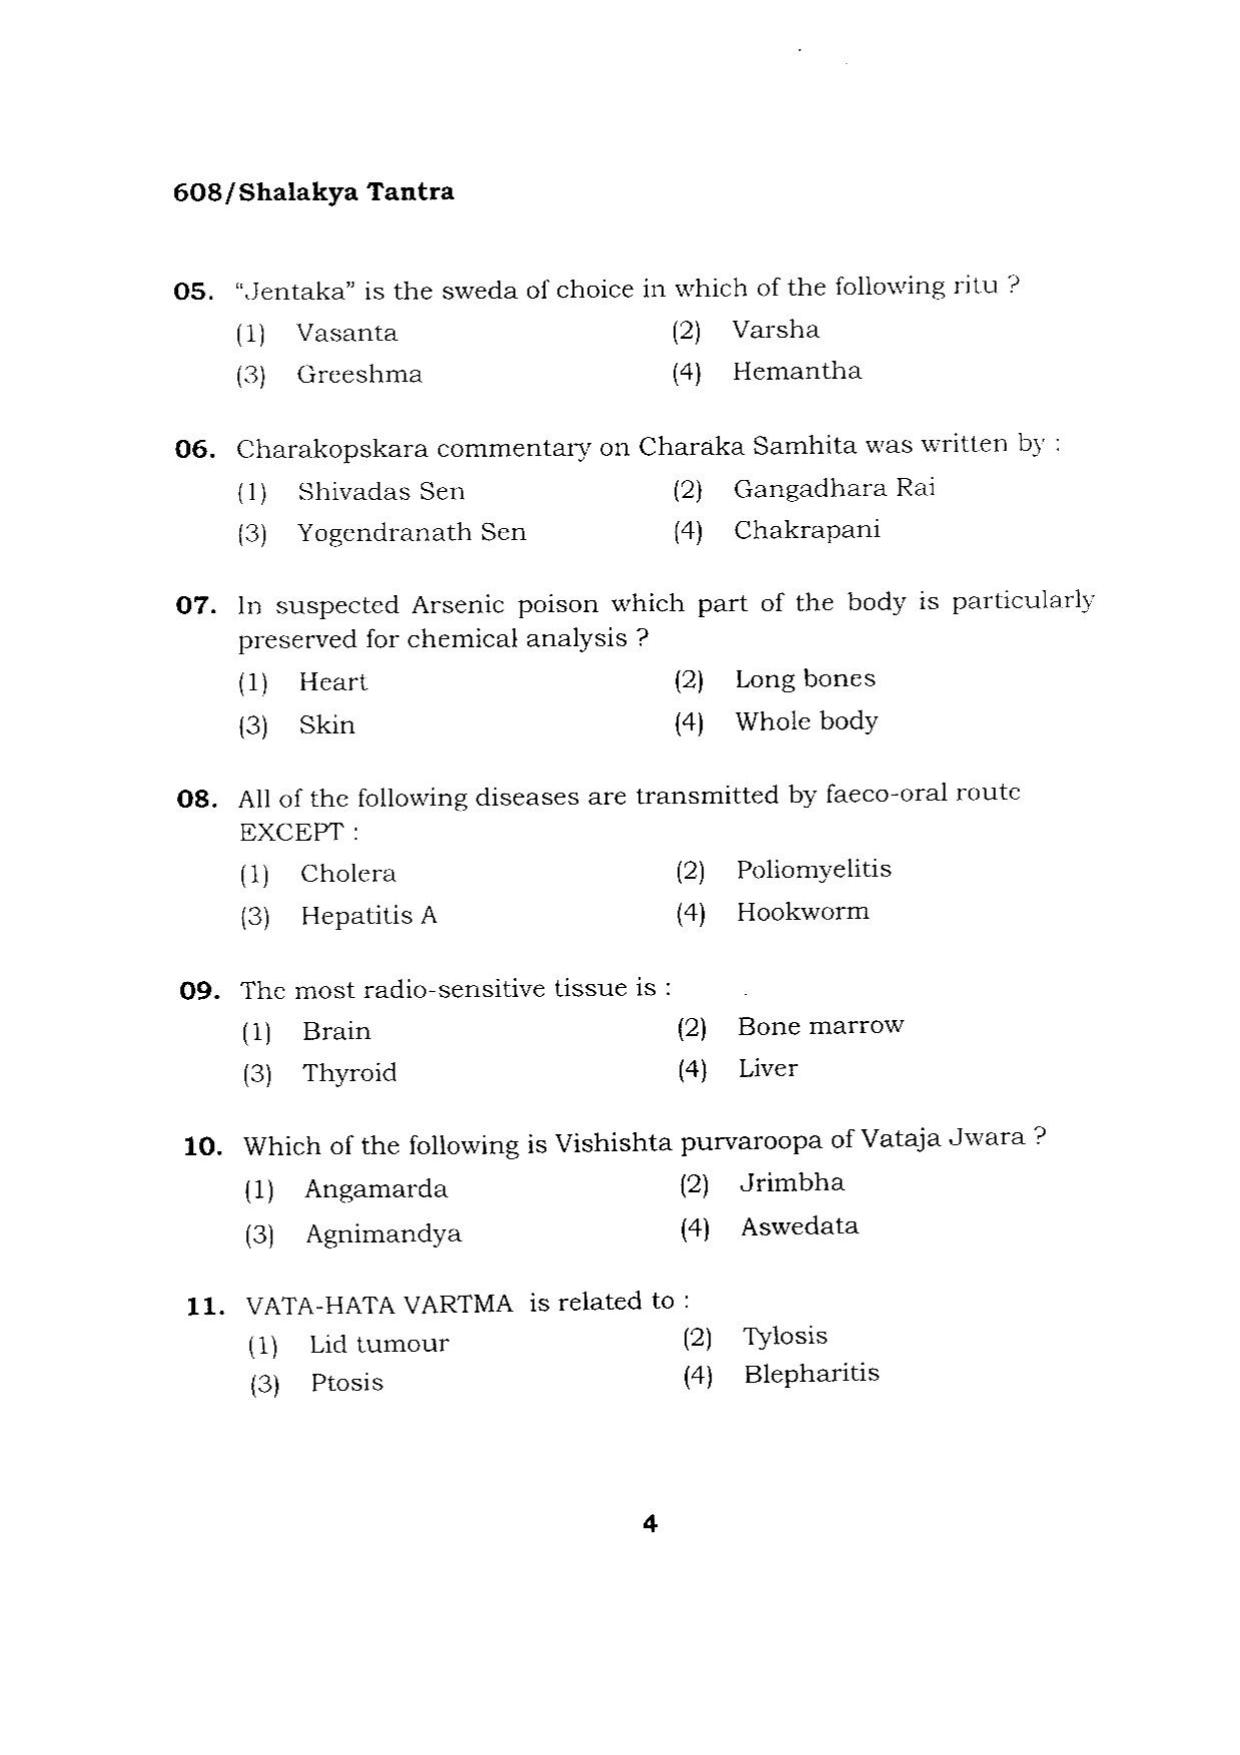 BHU RET SHALAKYA TANTRA 2015 Question Paper - Page 4